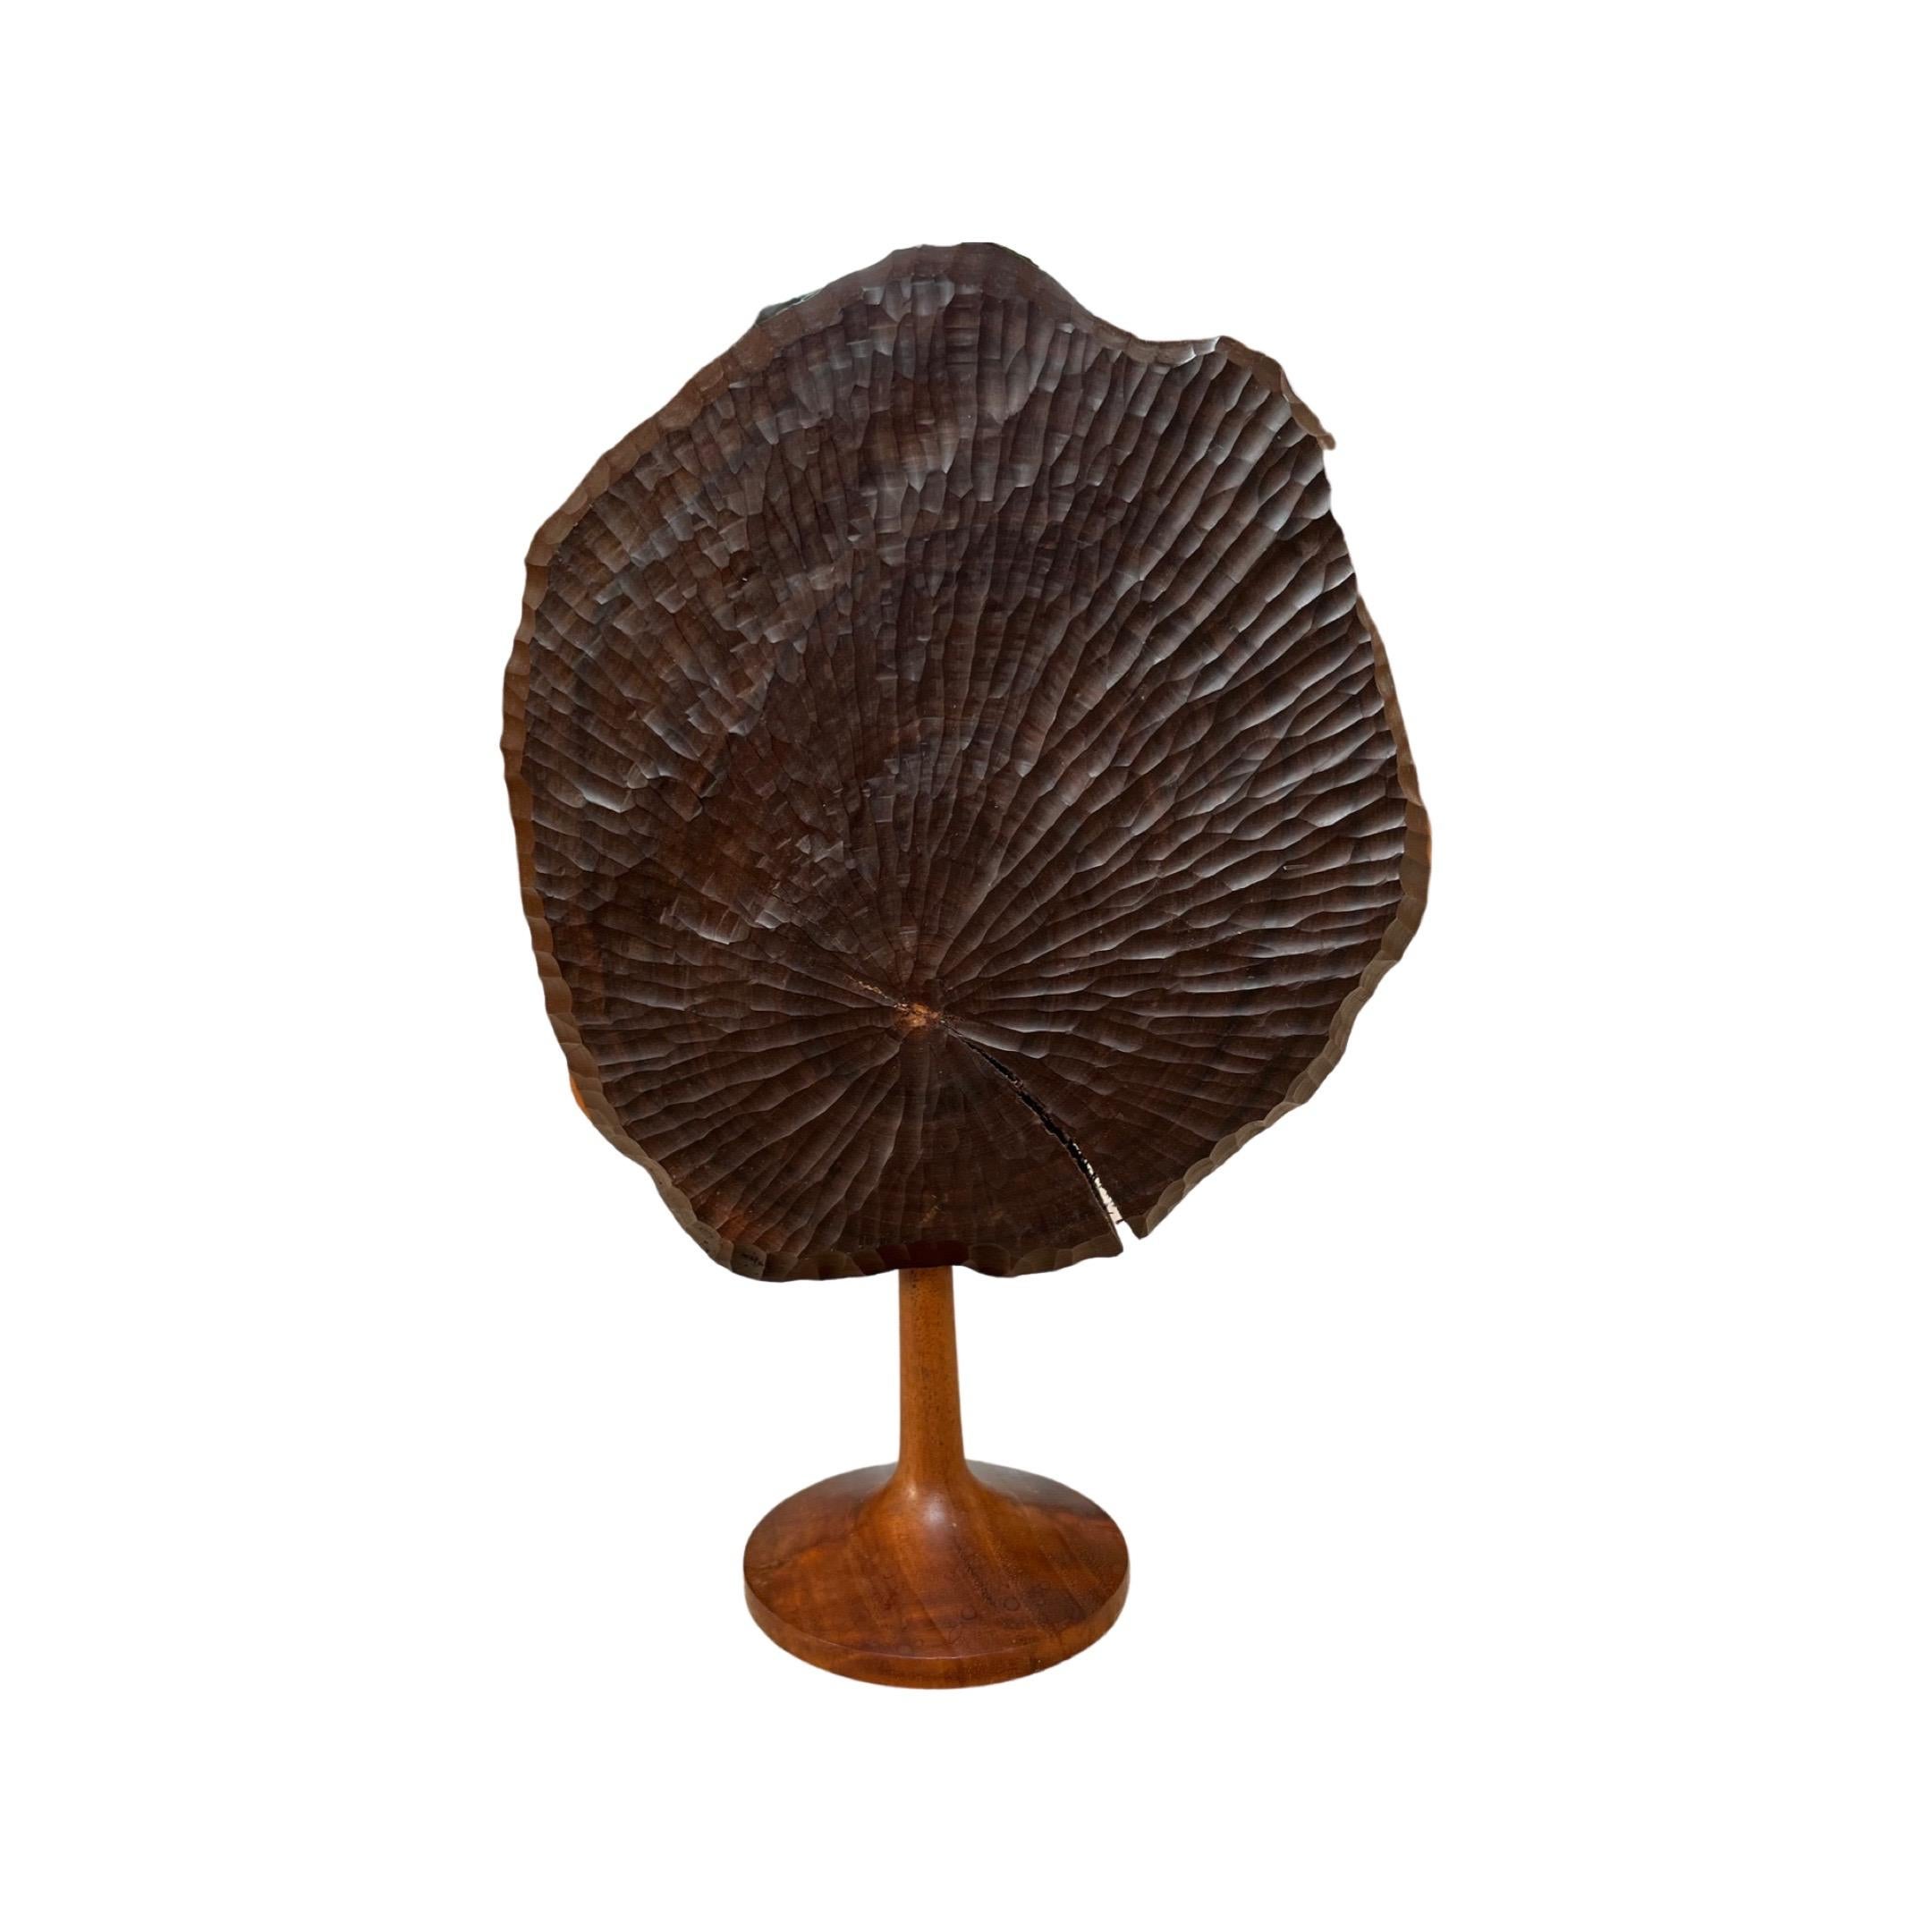 Jerry Glaser midcentury carved wood tree sculpture. A beautifully carved abstract tree form on turned wood base. A wonderful example of the work of Jerry Glaser, founder of Hi-tec wood tools and contemporary and close friend of both Sam Maloof and